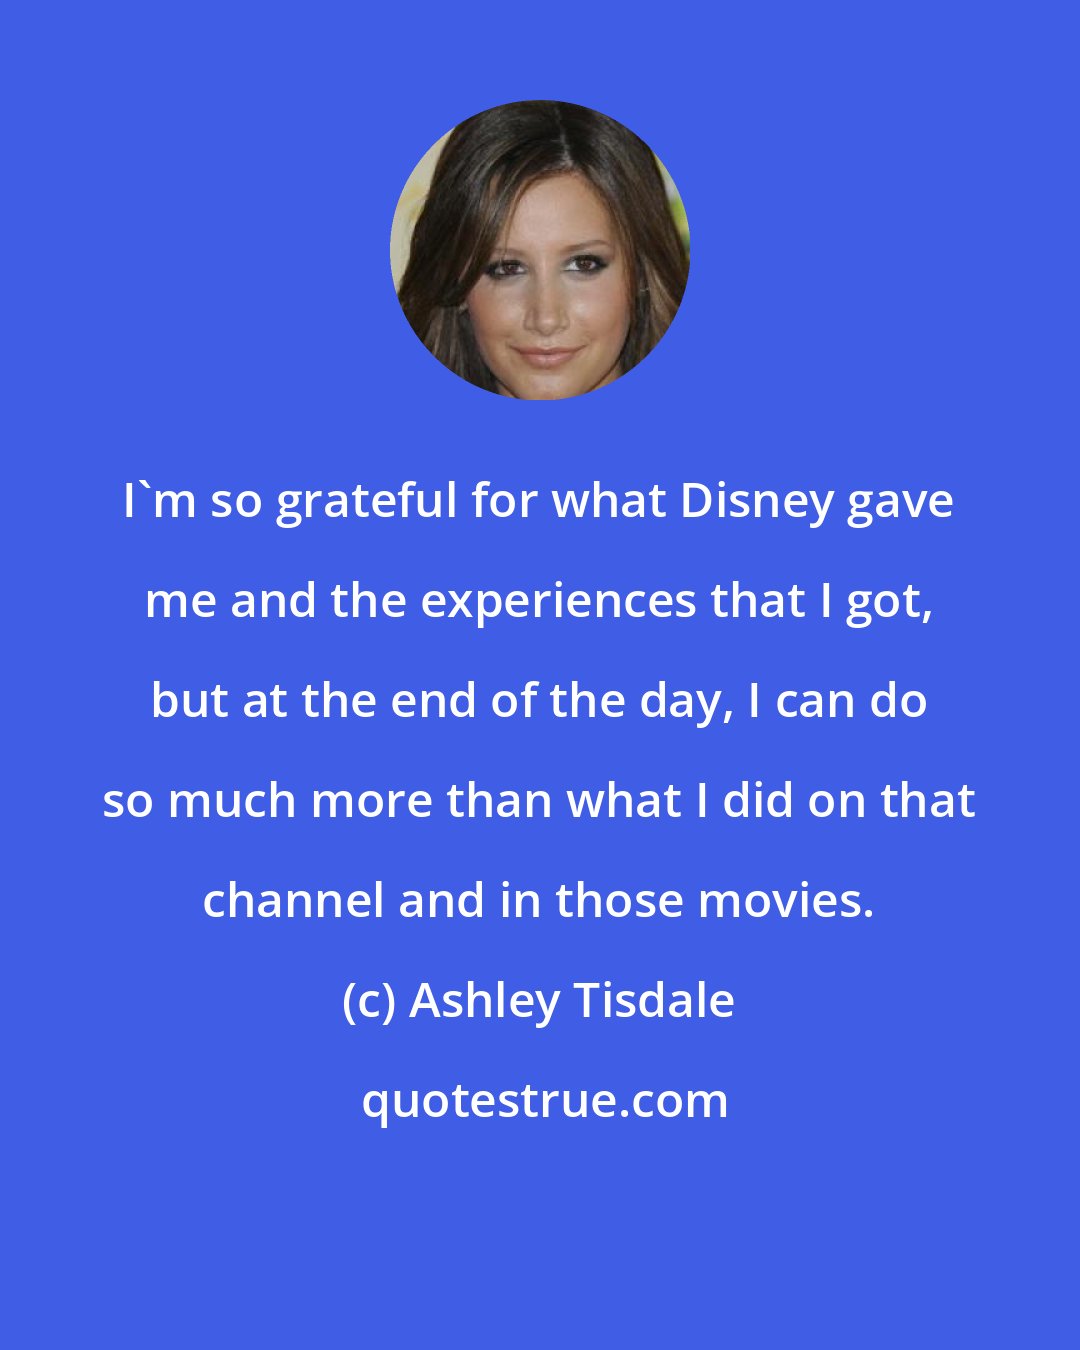 Ashley Tisdale: I'm so grateful for what Disney gave me and the experiences that I got, but at the end of the day, I can do so much more than what I did on that channel and in those movies.